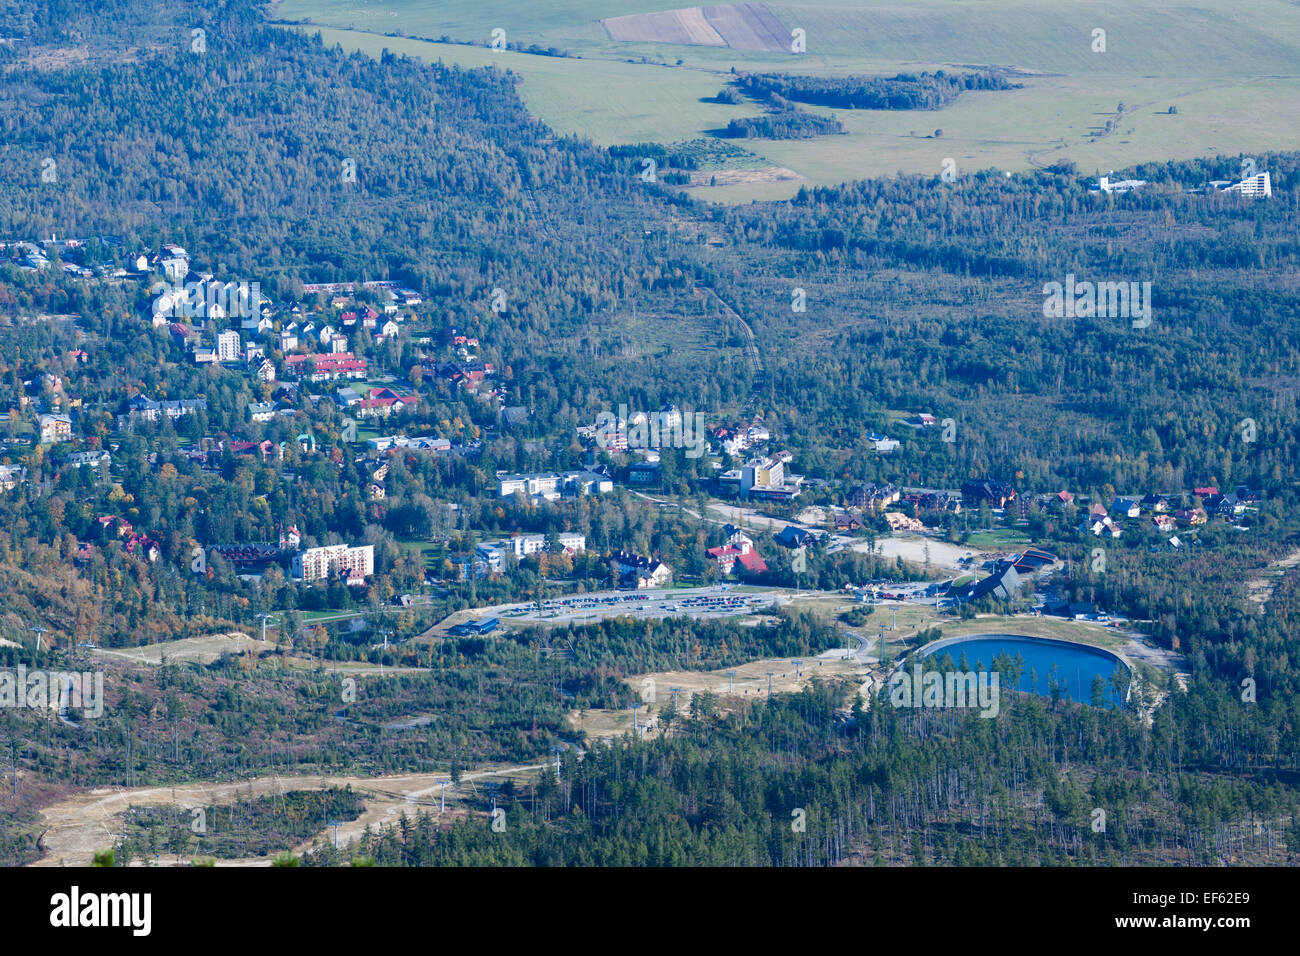 View of valley below Skalnate Pleso Mountain in the High Tatra Mountains, Slovakia, Central Europe Stock Photo